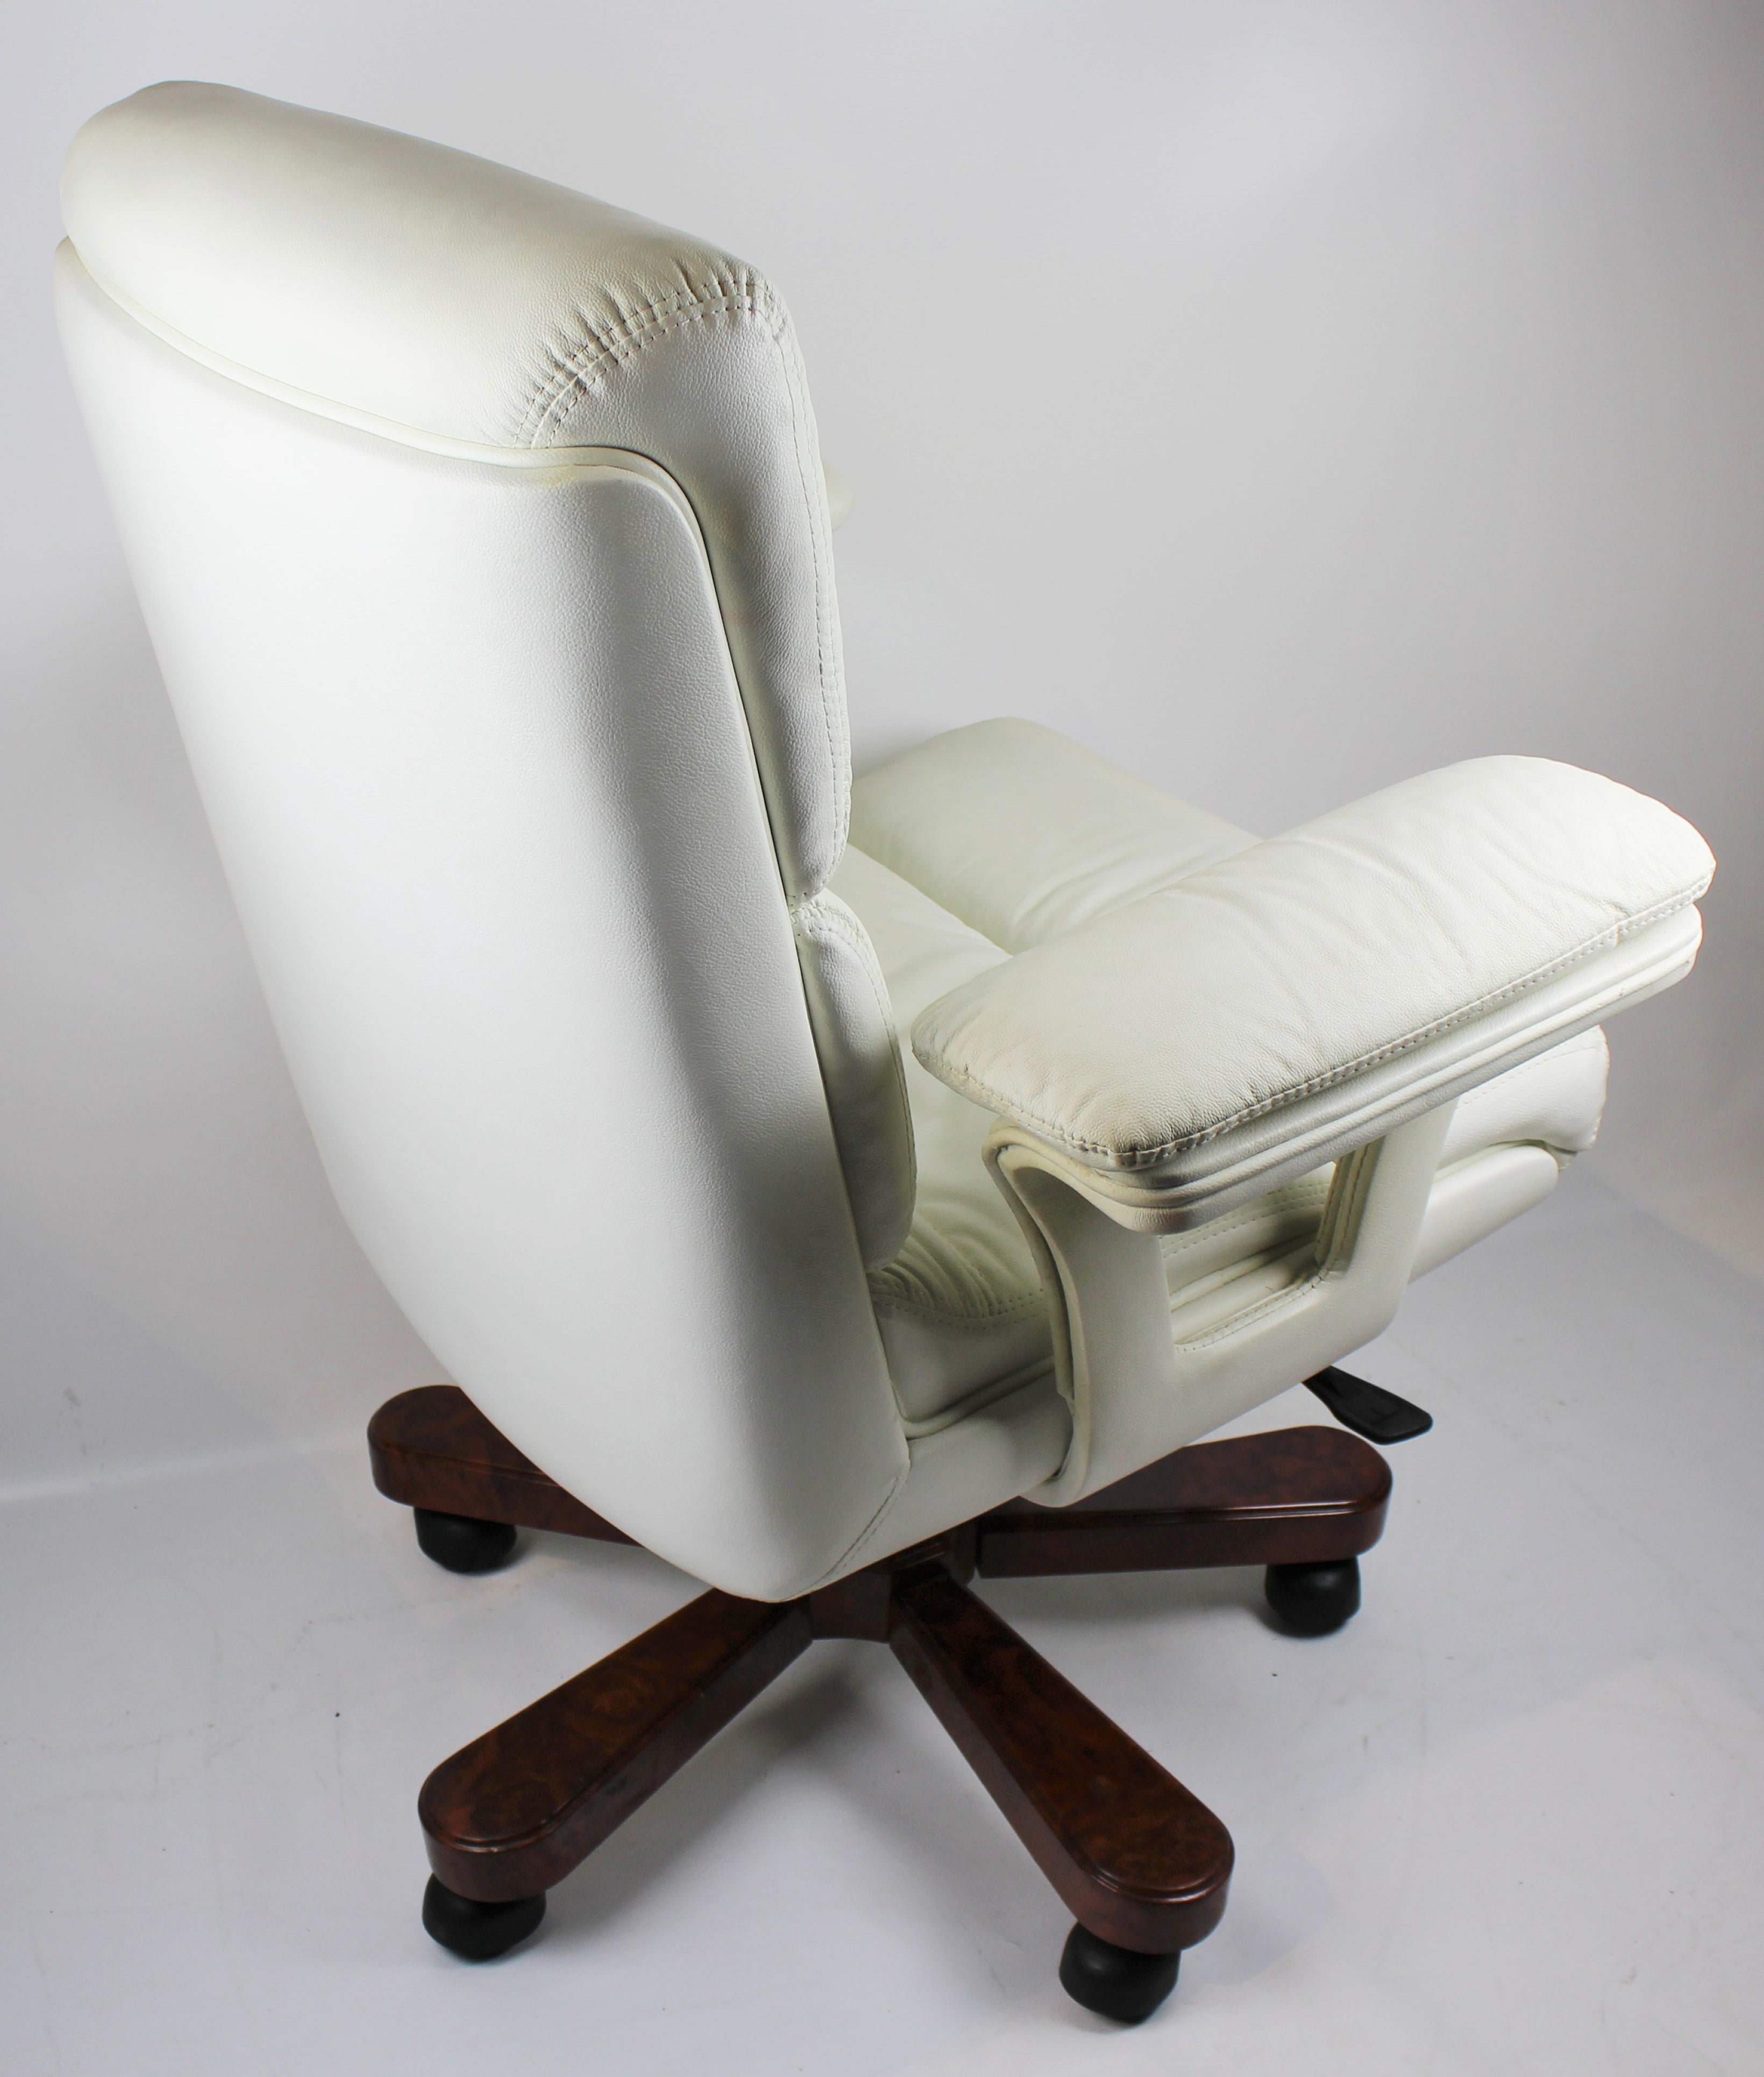 Executive Office Chair Genuine White Leather - DES-B020-W